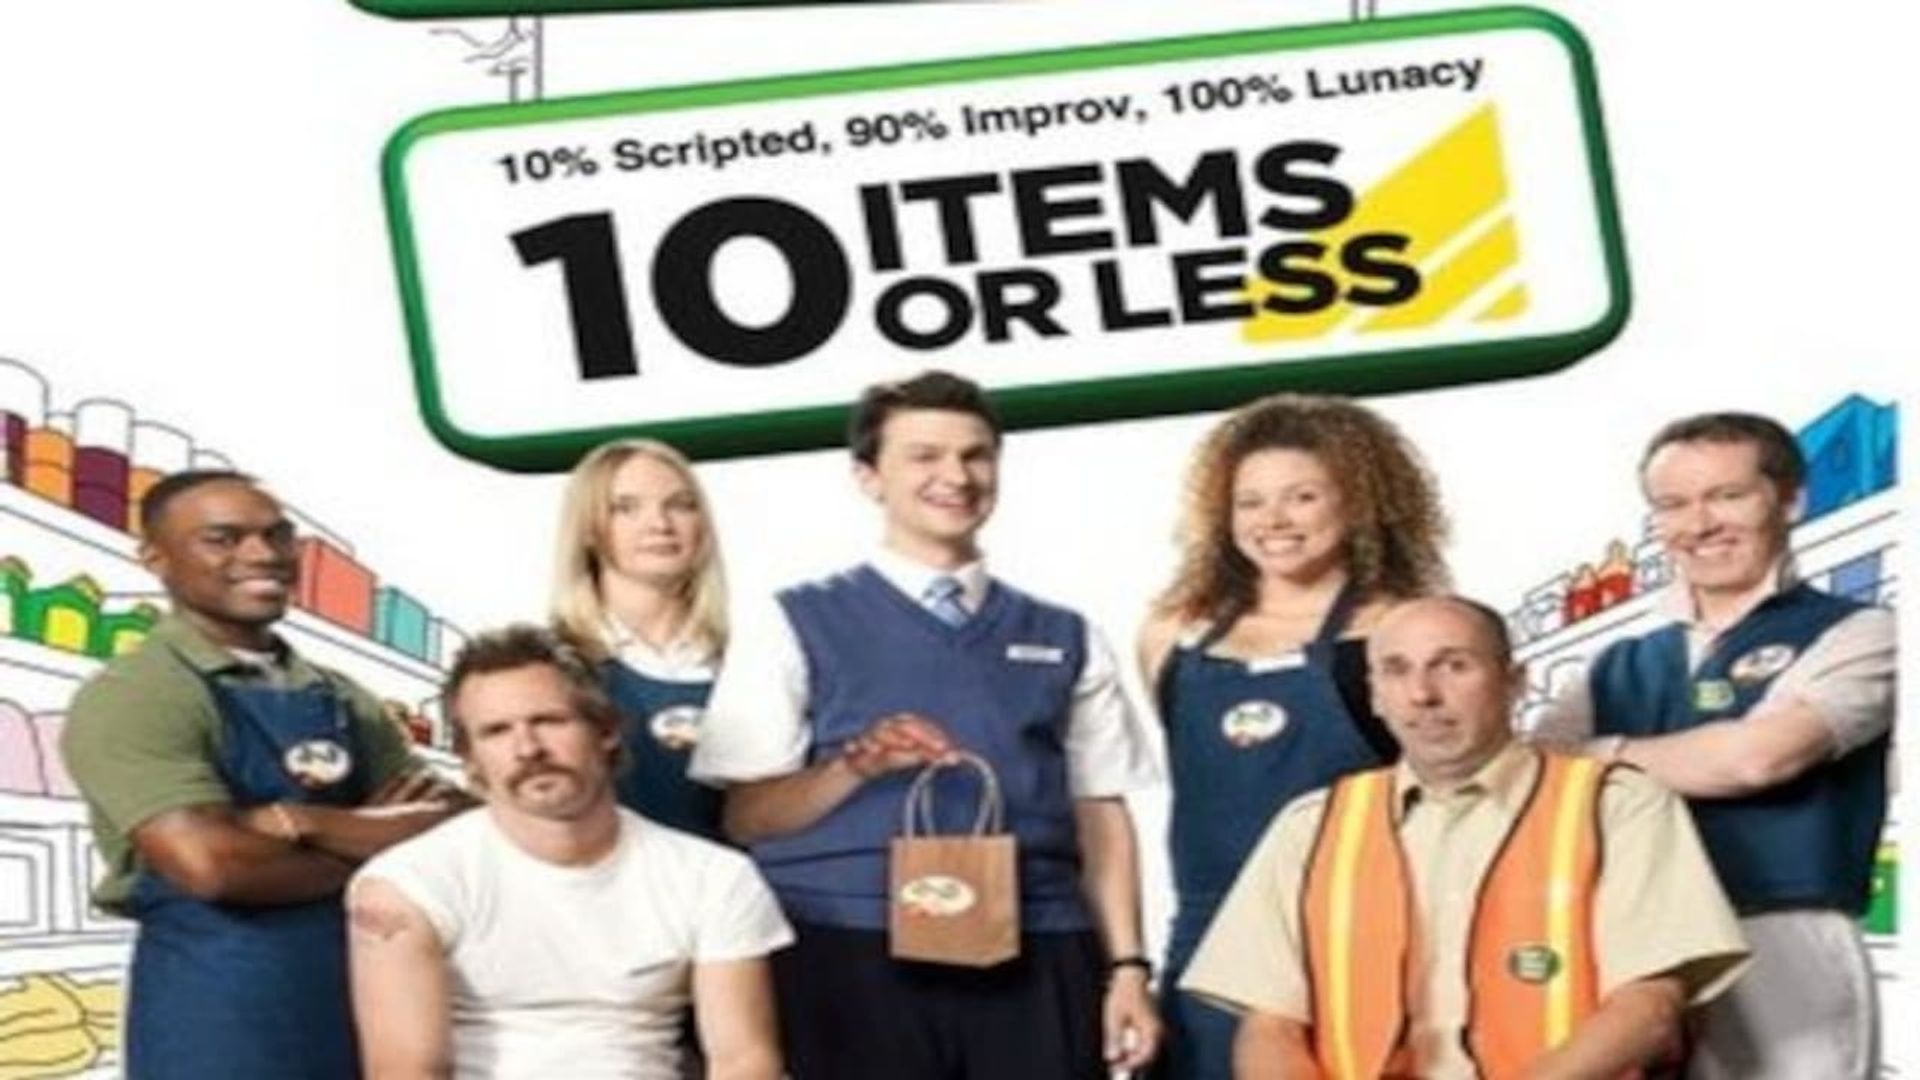 10 Items or Less background